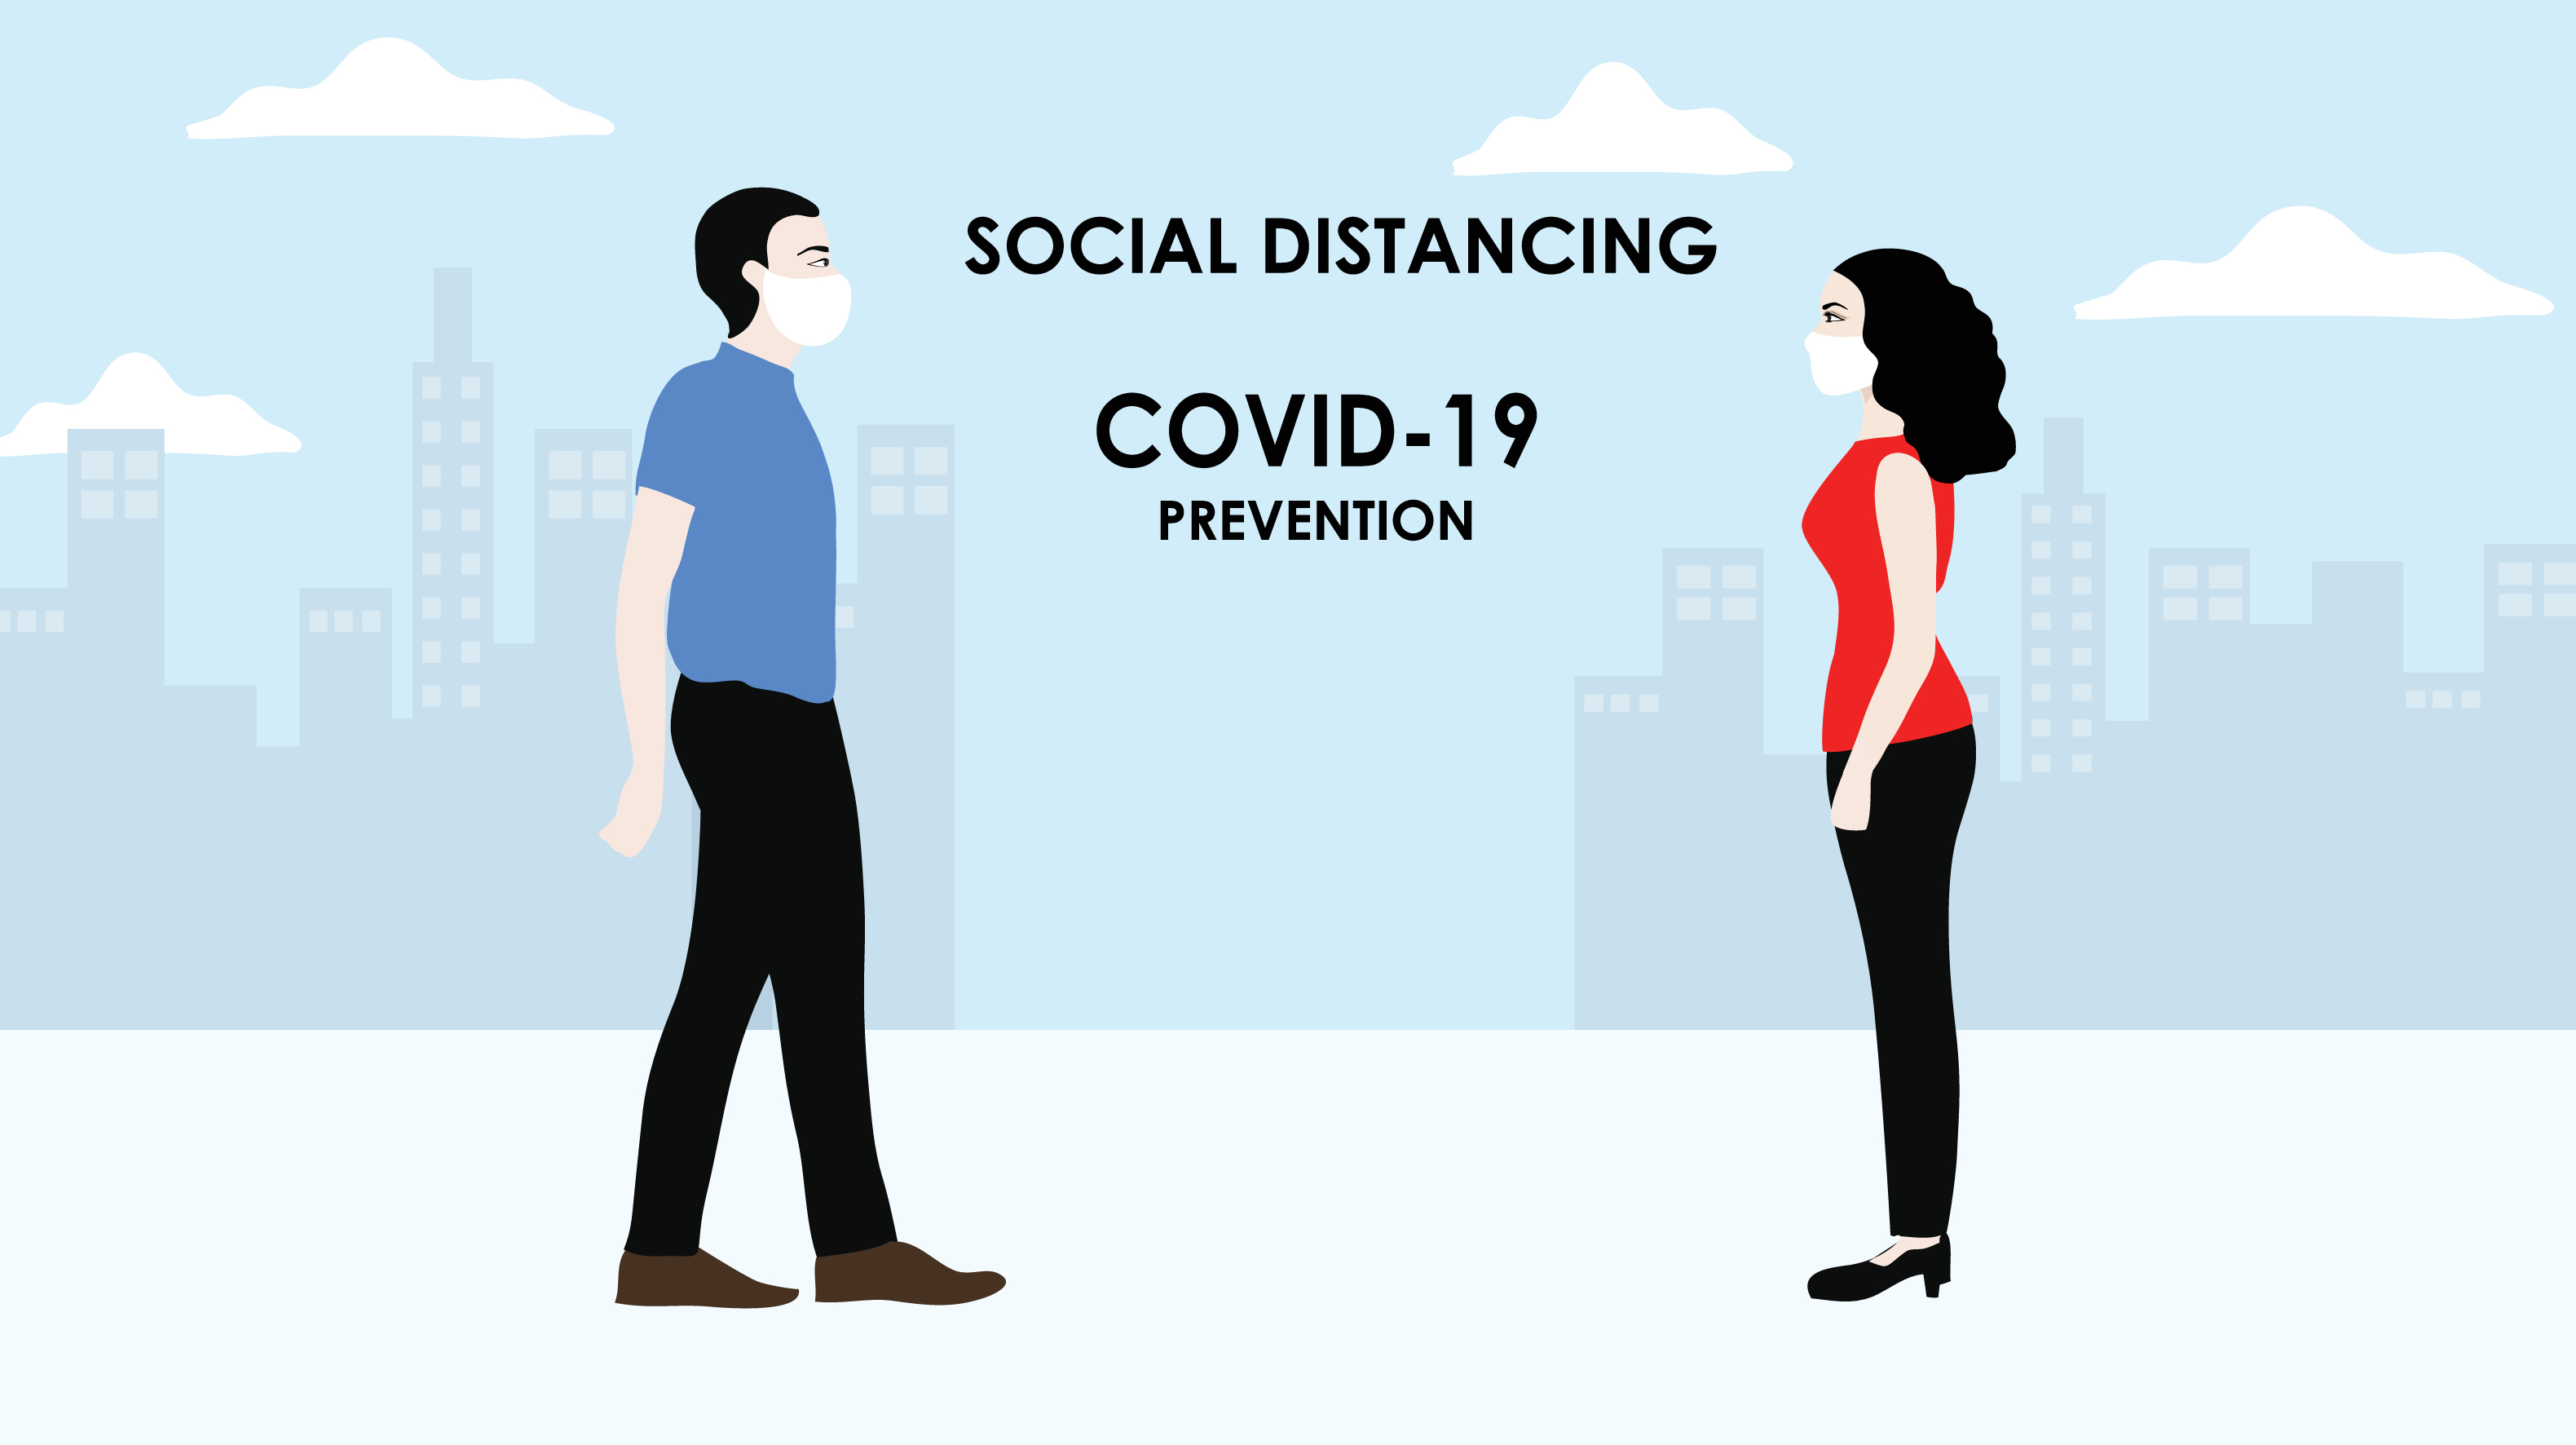 Social Distancing in COVID-19